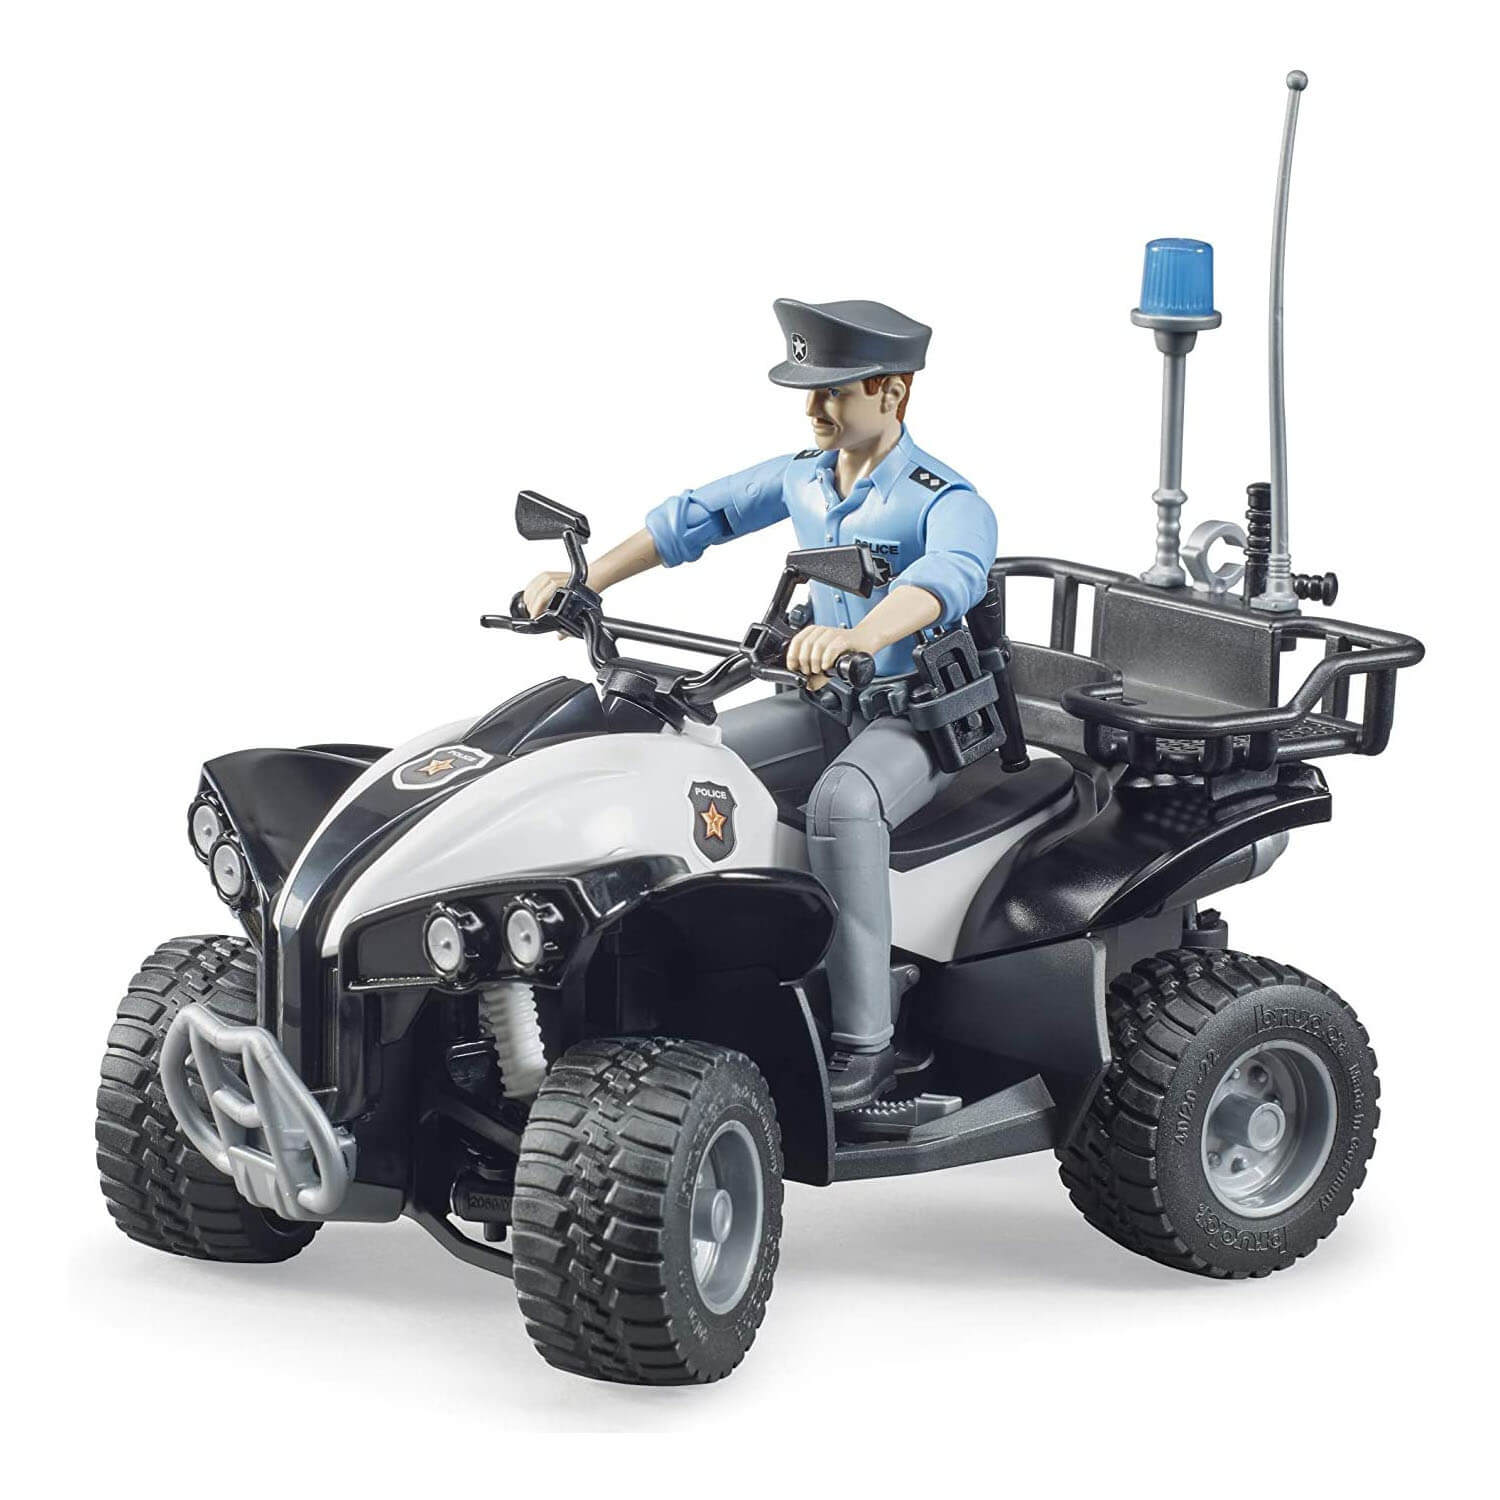 Bruder Pro Series 1:16 Scale Police Quad with Policeman and Accessories